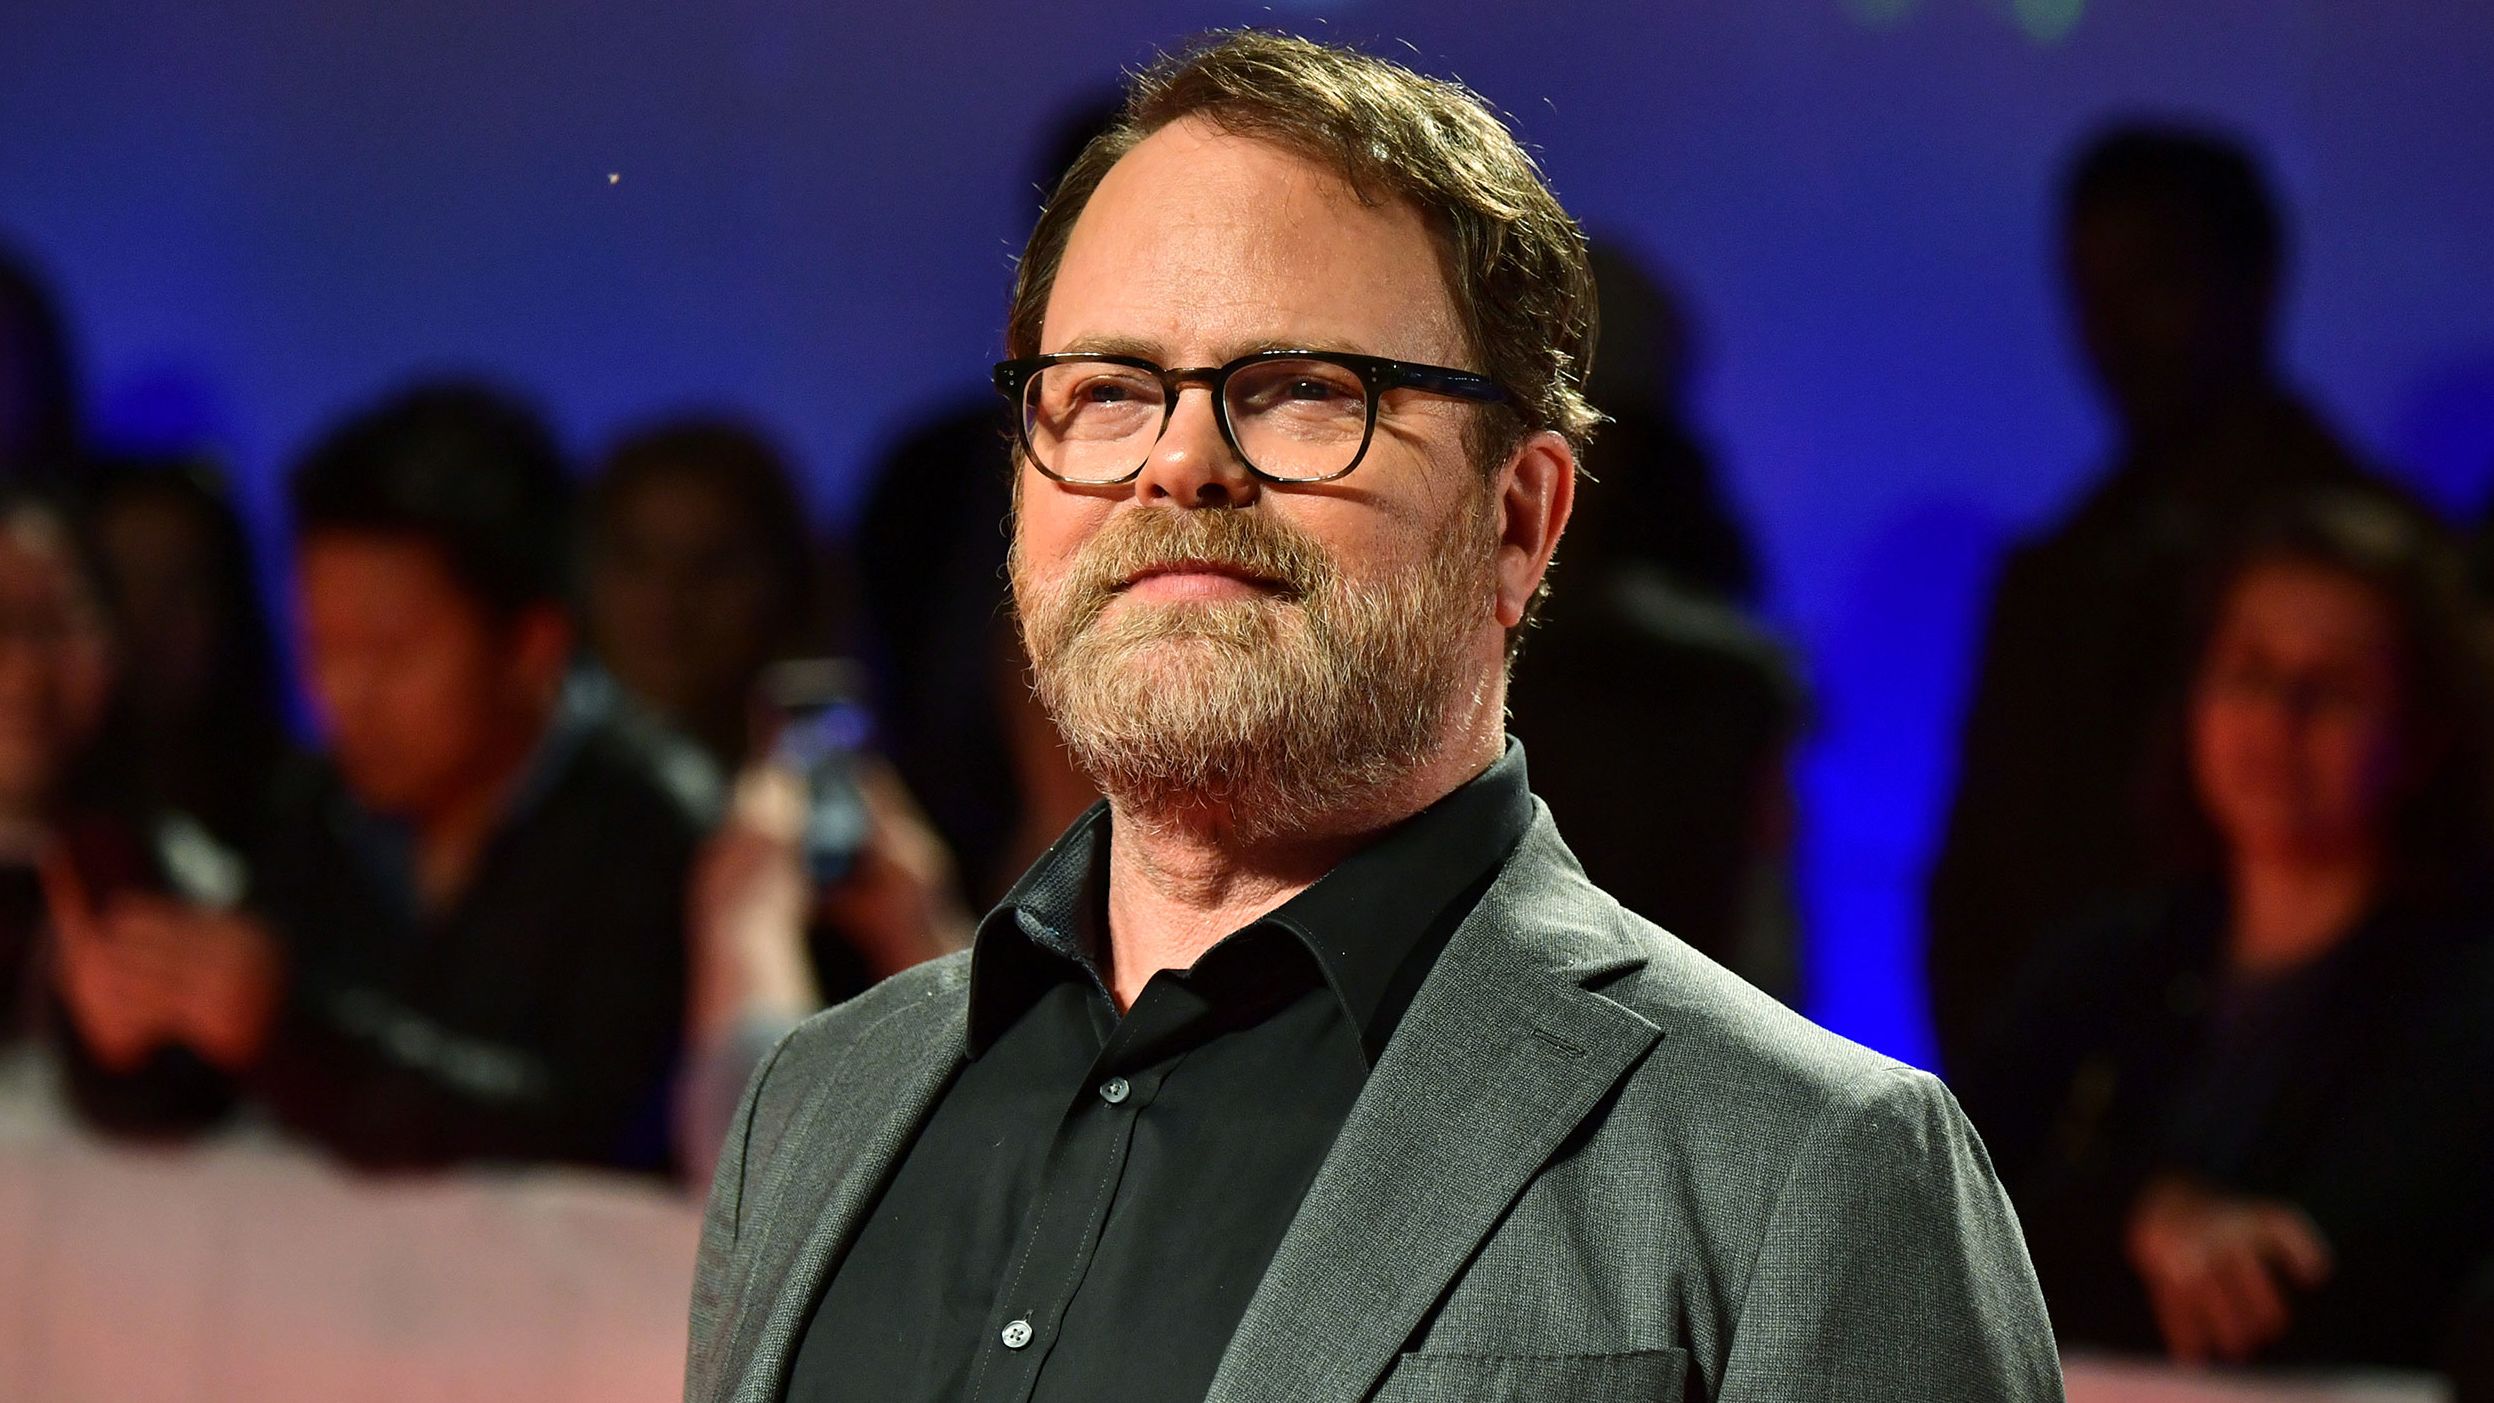 Actor Rainn Wilson, seen here attending the 2019 Toronto International Film Festival, is hoping his environmental advocacy will get the attention of world leaders. 